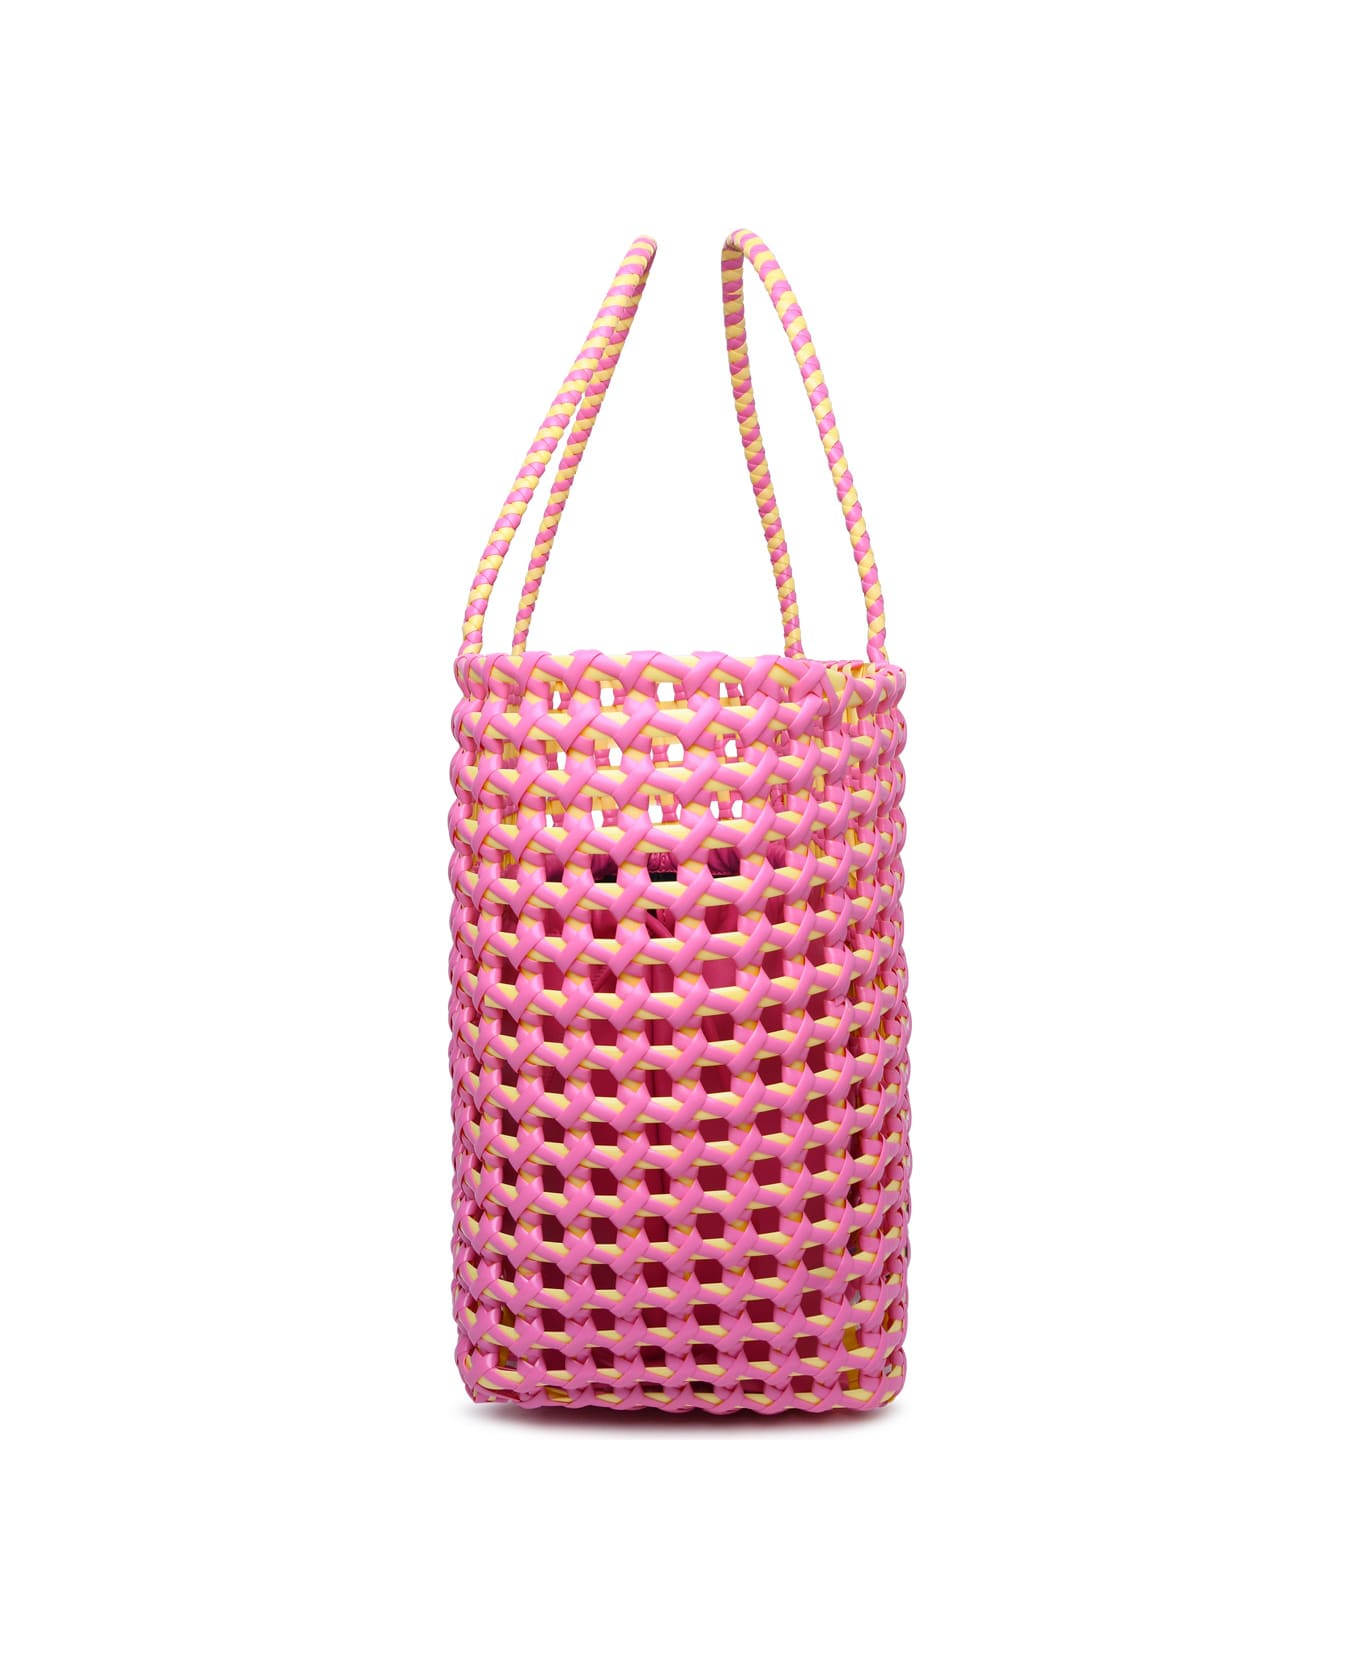 MSGM Large Bag In Two-tone Polyethylene Blend - Pink